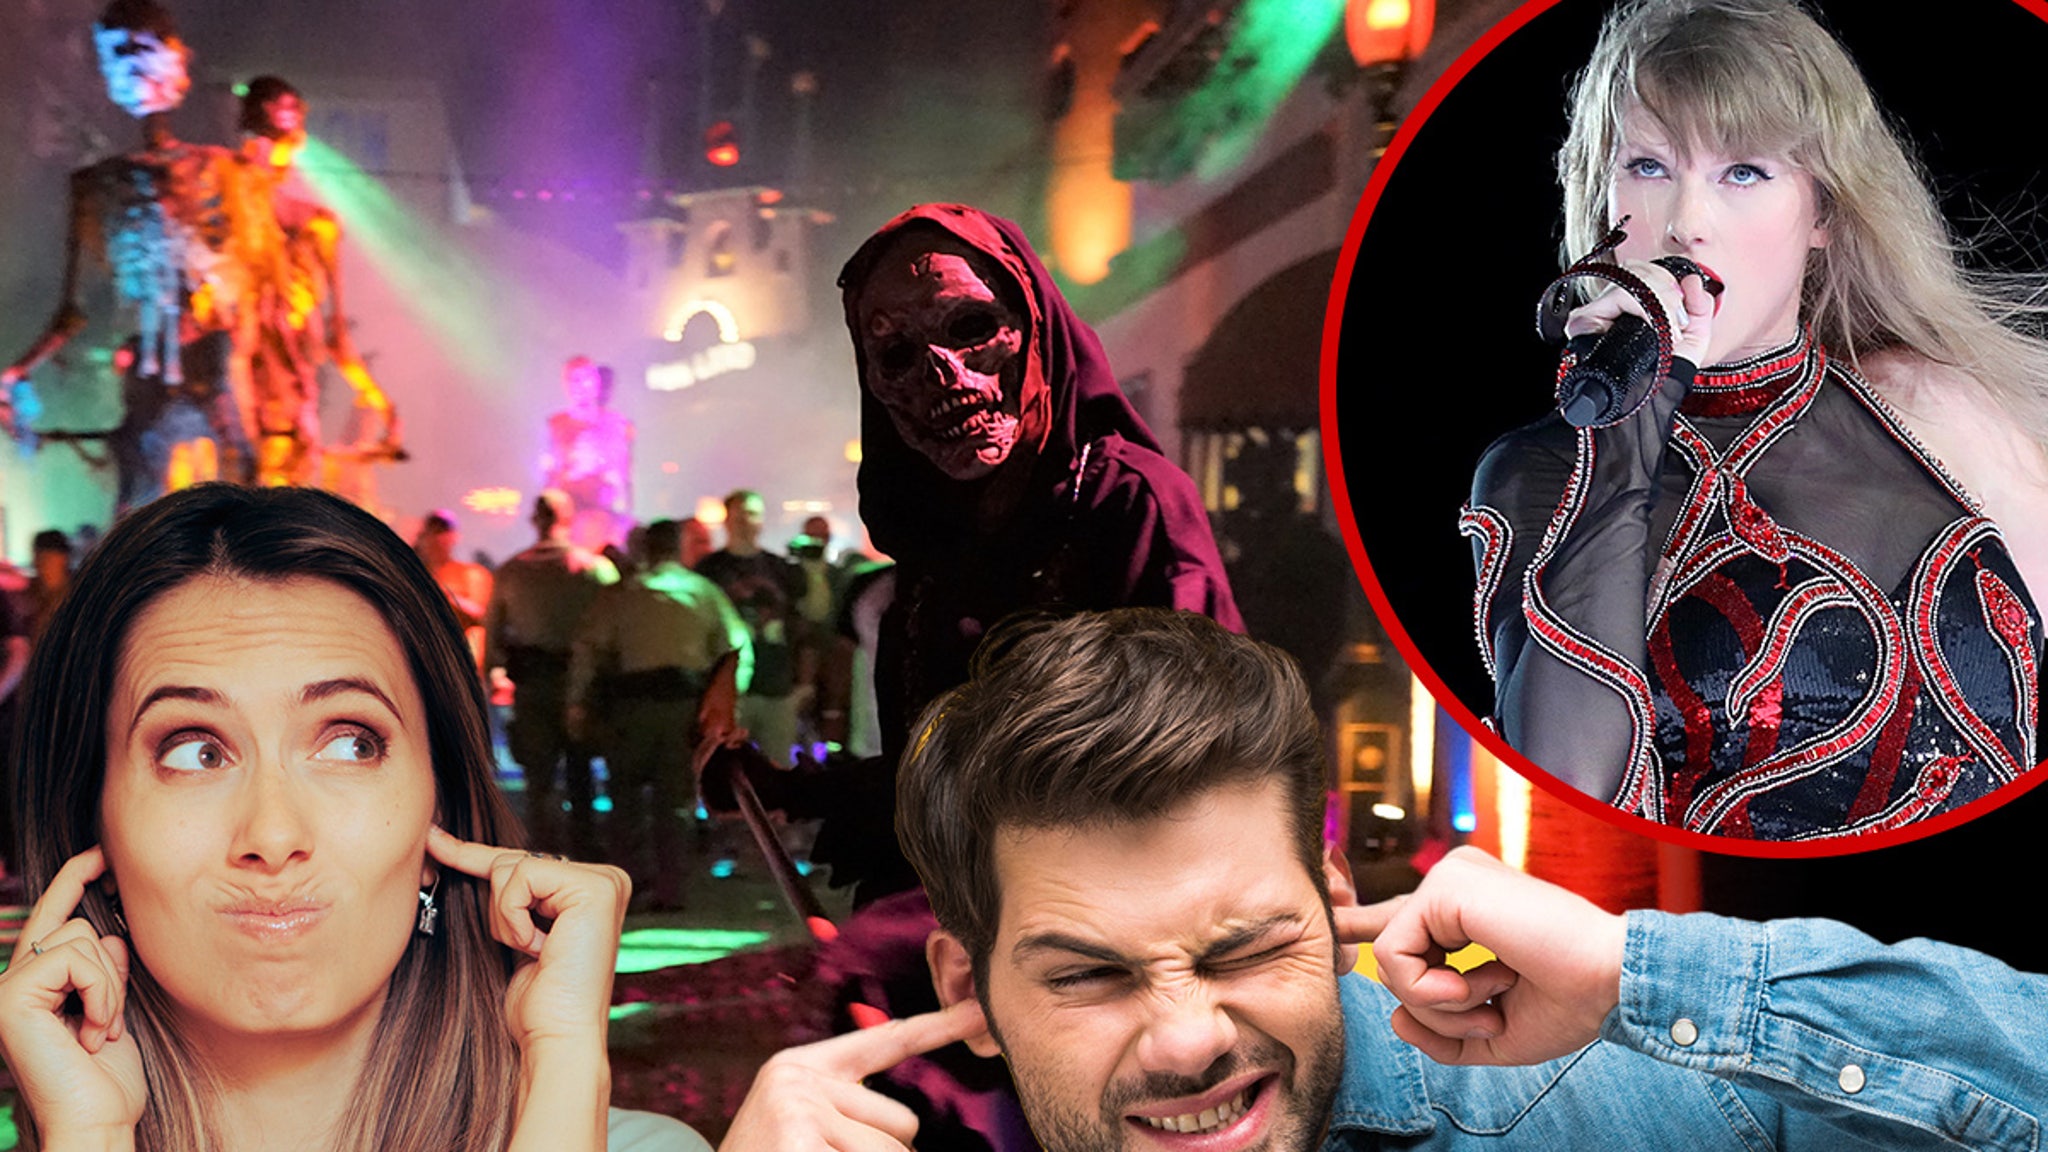 Halloween Horror Nights Staff Threaten Lingering Guests with Taylor Swift Music